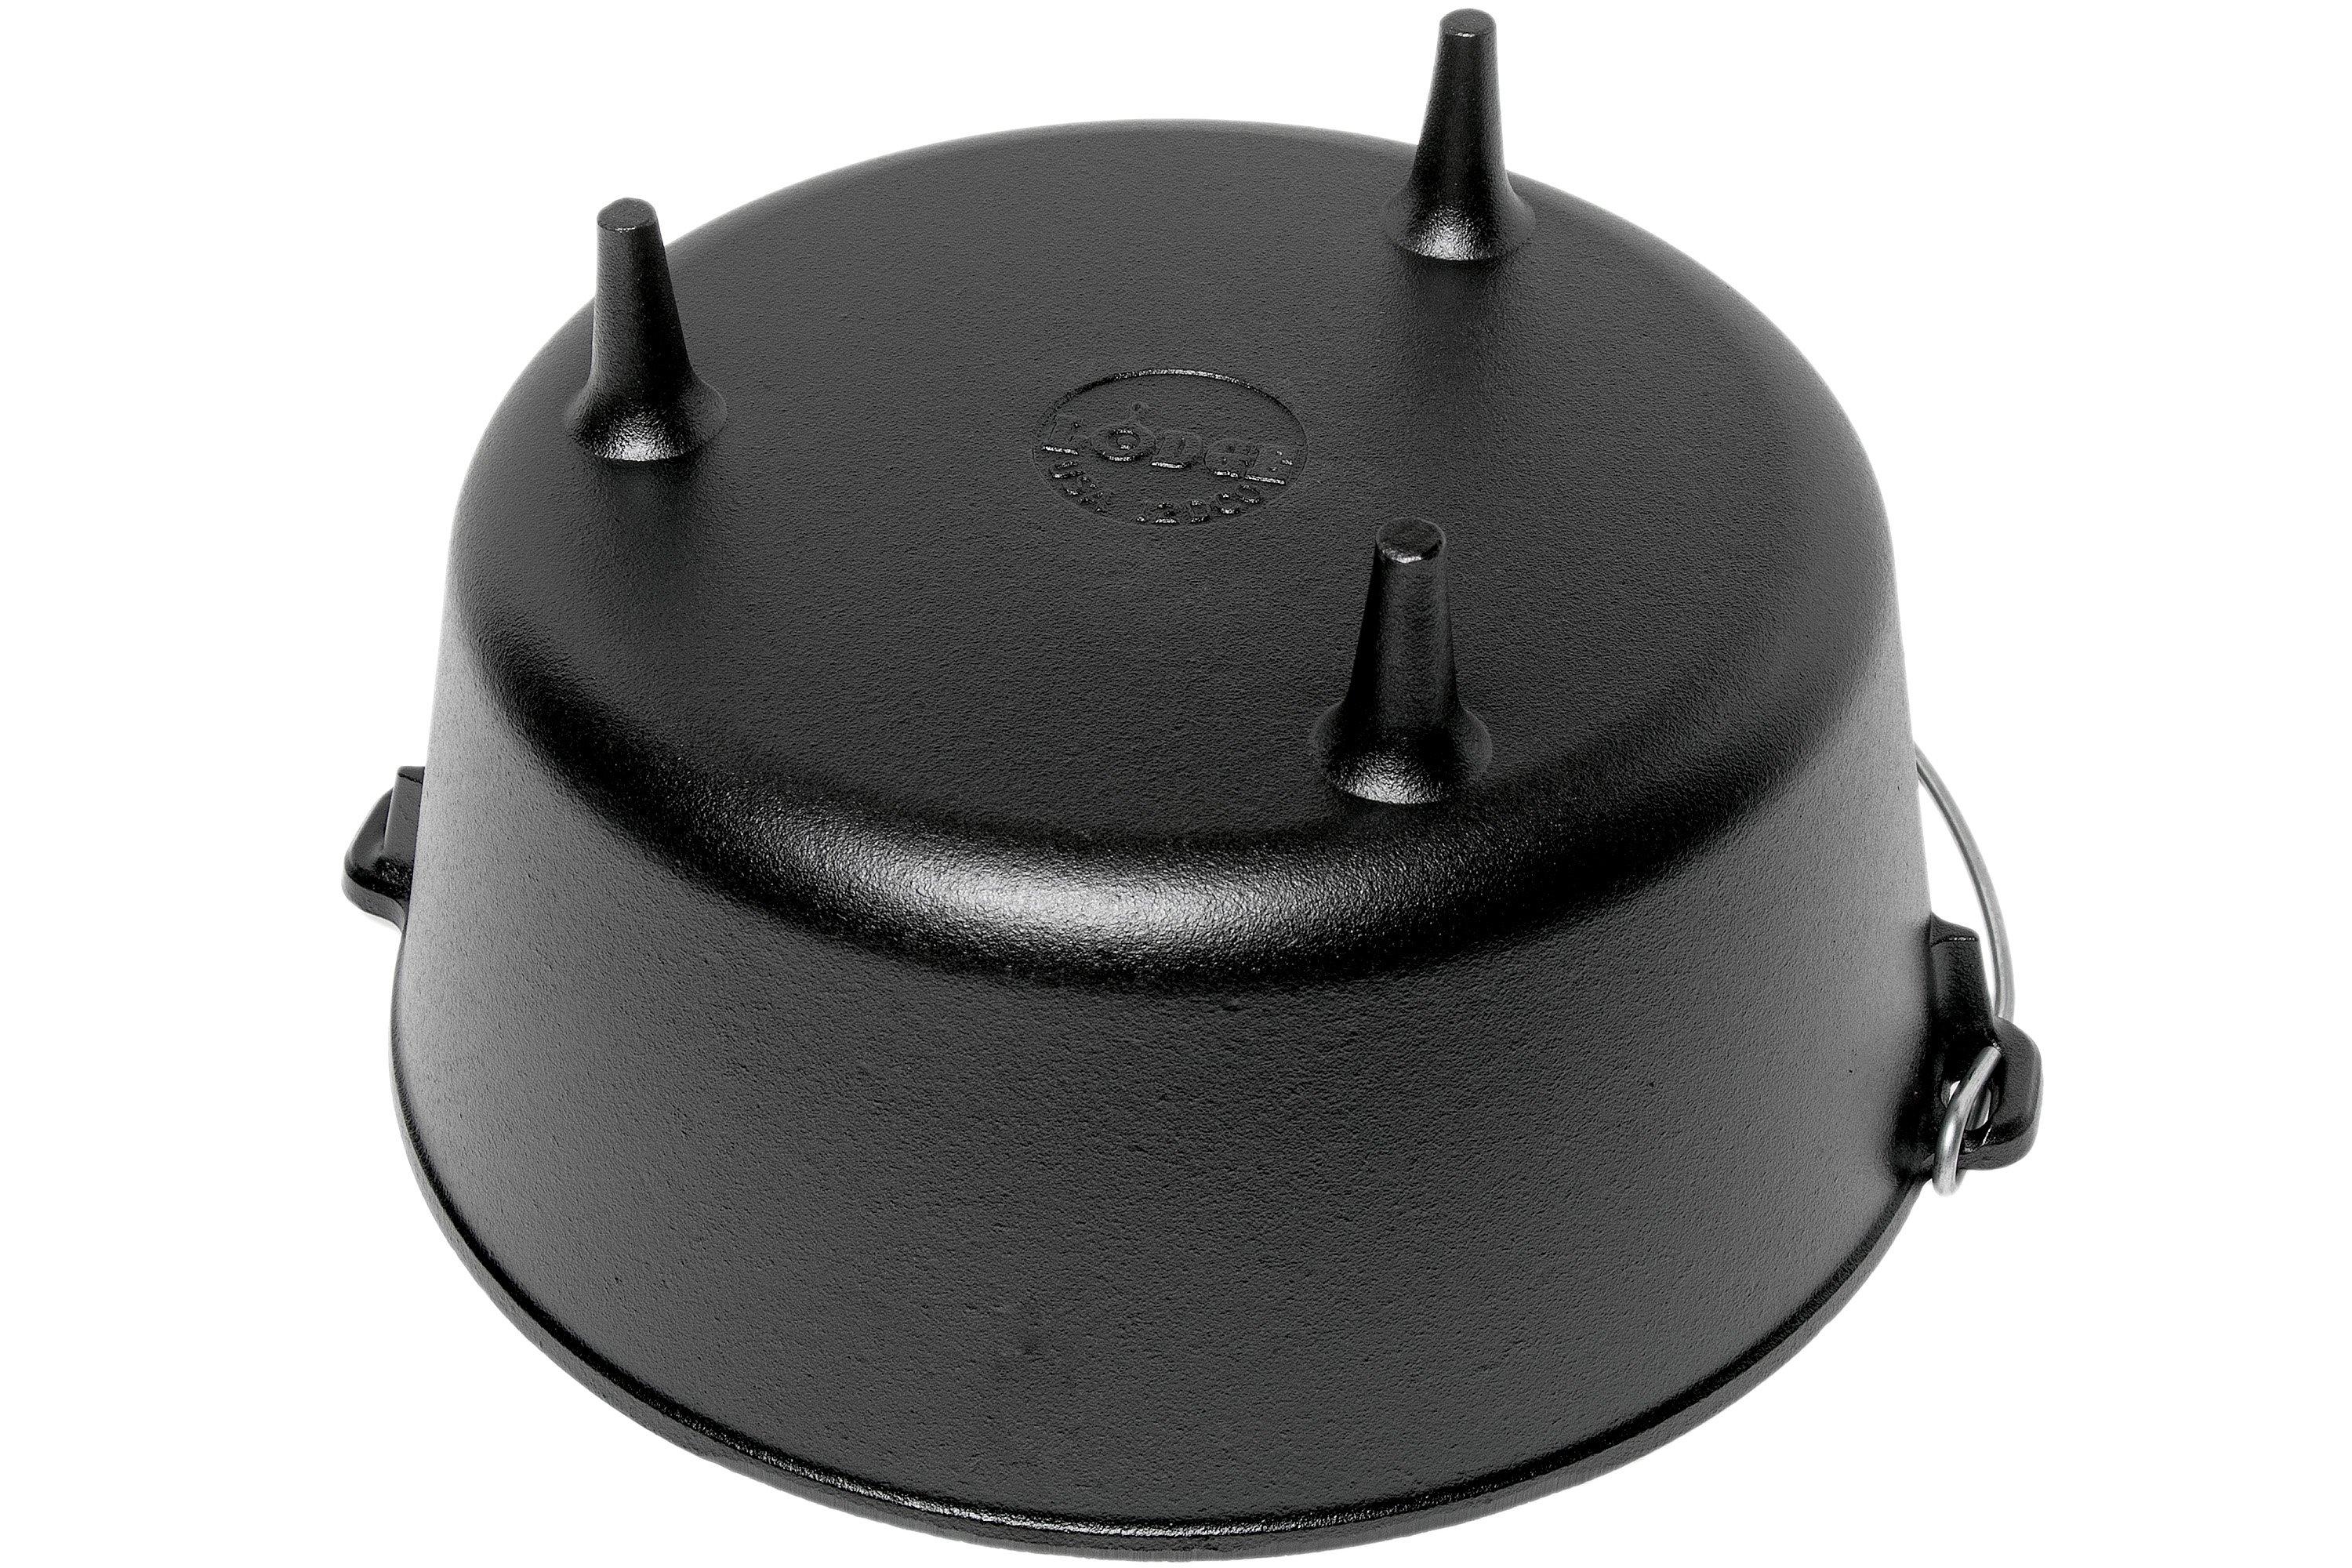 Lodge Camp Dutch Oven Deluxe lid lifter A5DLL  Advantageously shopping at